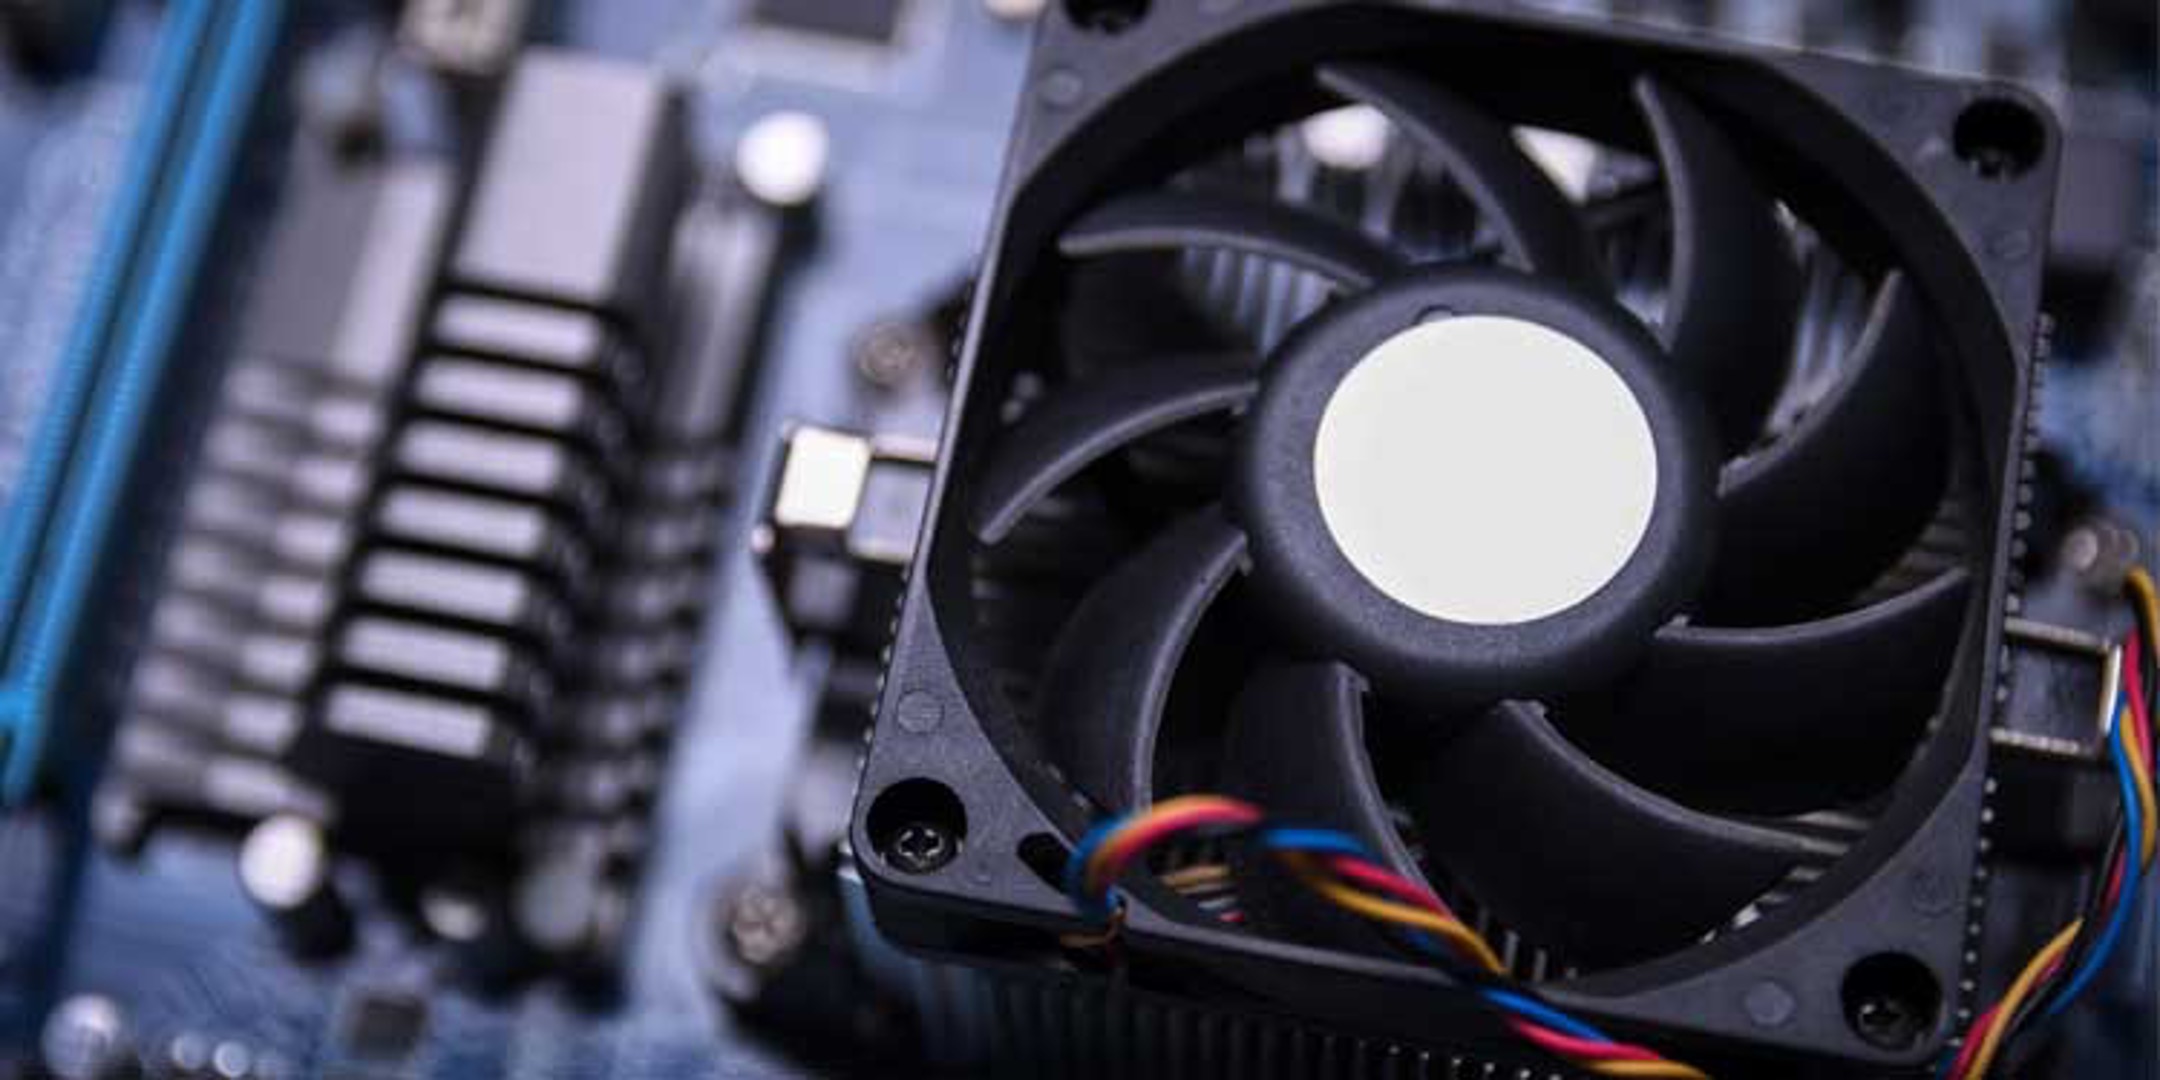 How To Fix A Loose Case Fan Blade